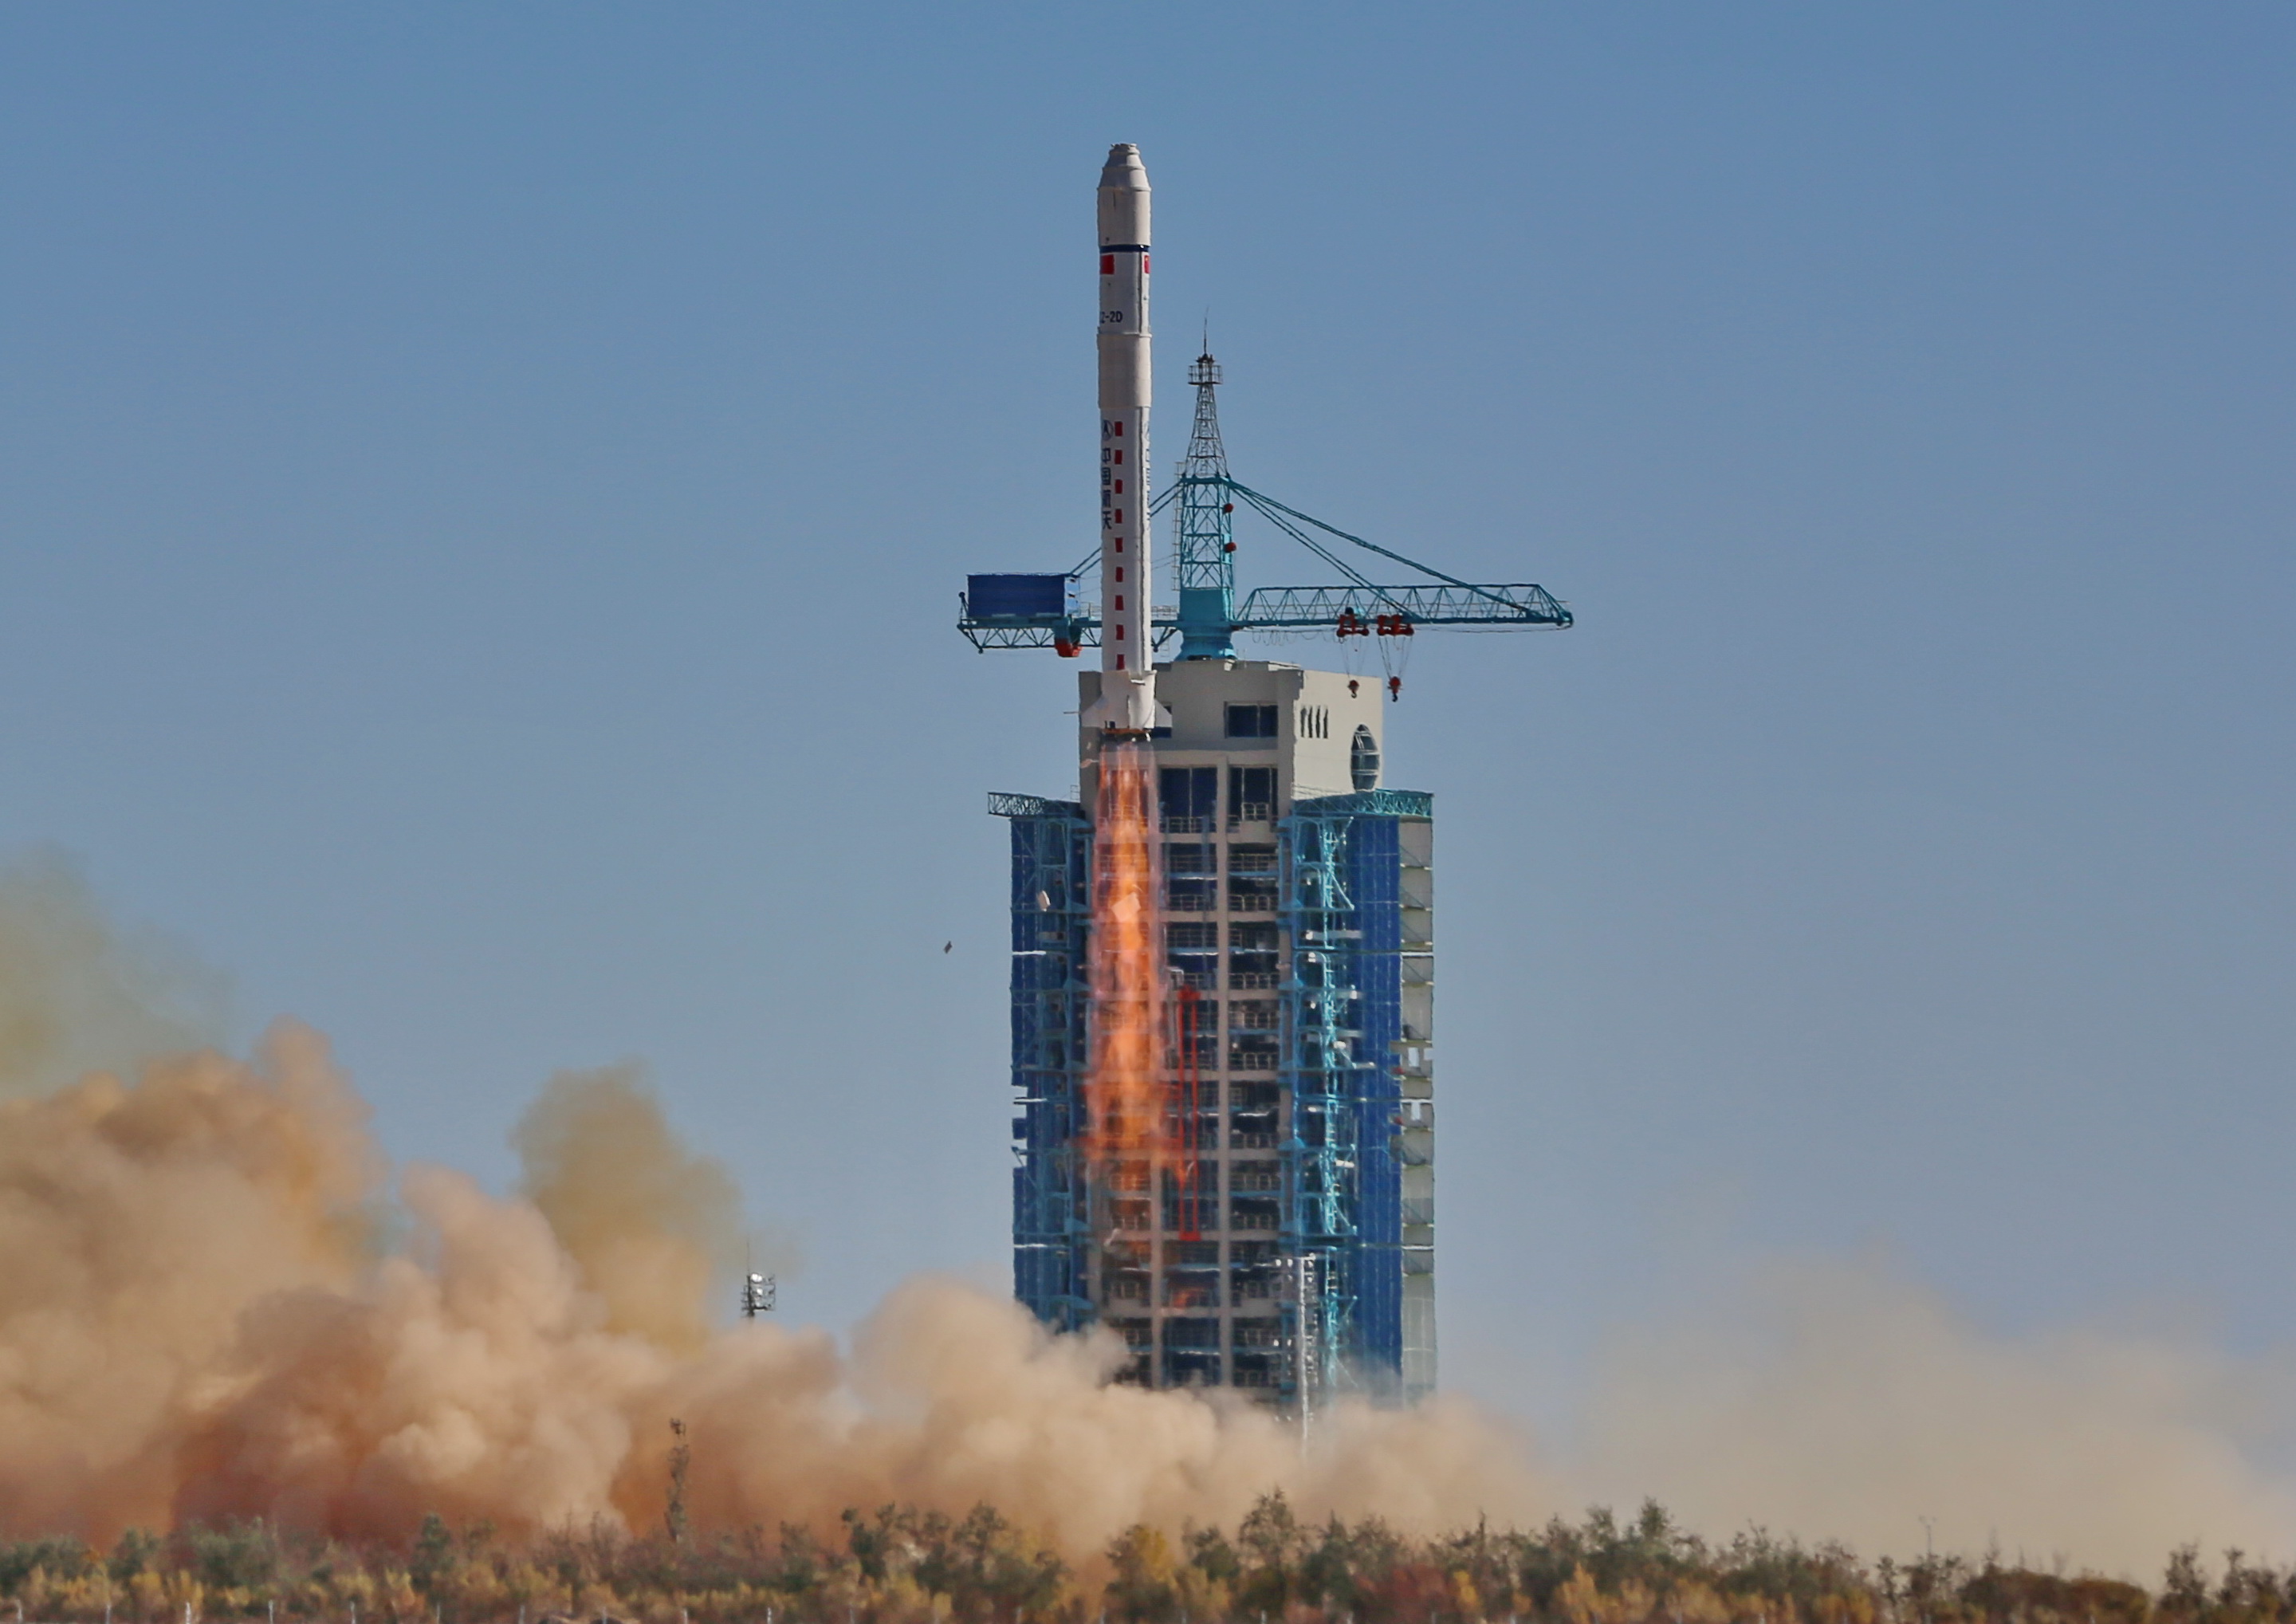 (151026) -- JIUQUAN, Oct. 26, 2015 (Xinhua) -- A Long March-2D carrier rocket carrying the Tianhui-1C mapping satellite blasts off from the launch pad at the Jiuquan Satellite Launch Center in northwest China's Gansu Province, Oct. 26, 2015. Designed by a subsidiary of the CASTC, Tianhui-1C is the third satellite in the Tianhui-1 series and will be used for scientific experiments, land resource surveys, mapping, crop yield estimation and disaster relief.(Xinhua/Yang Shiyao)(wjq)